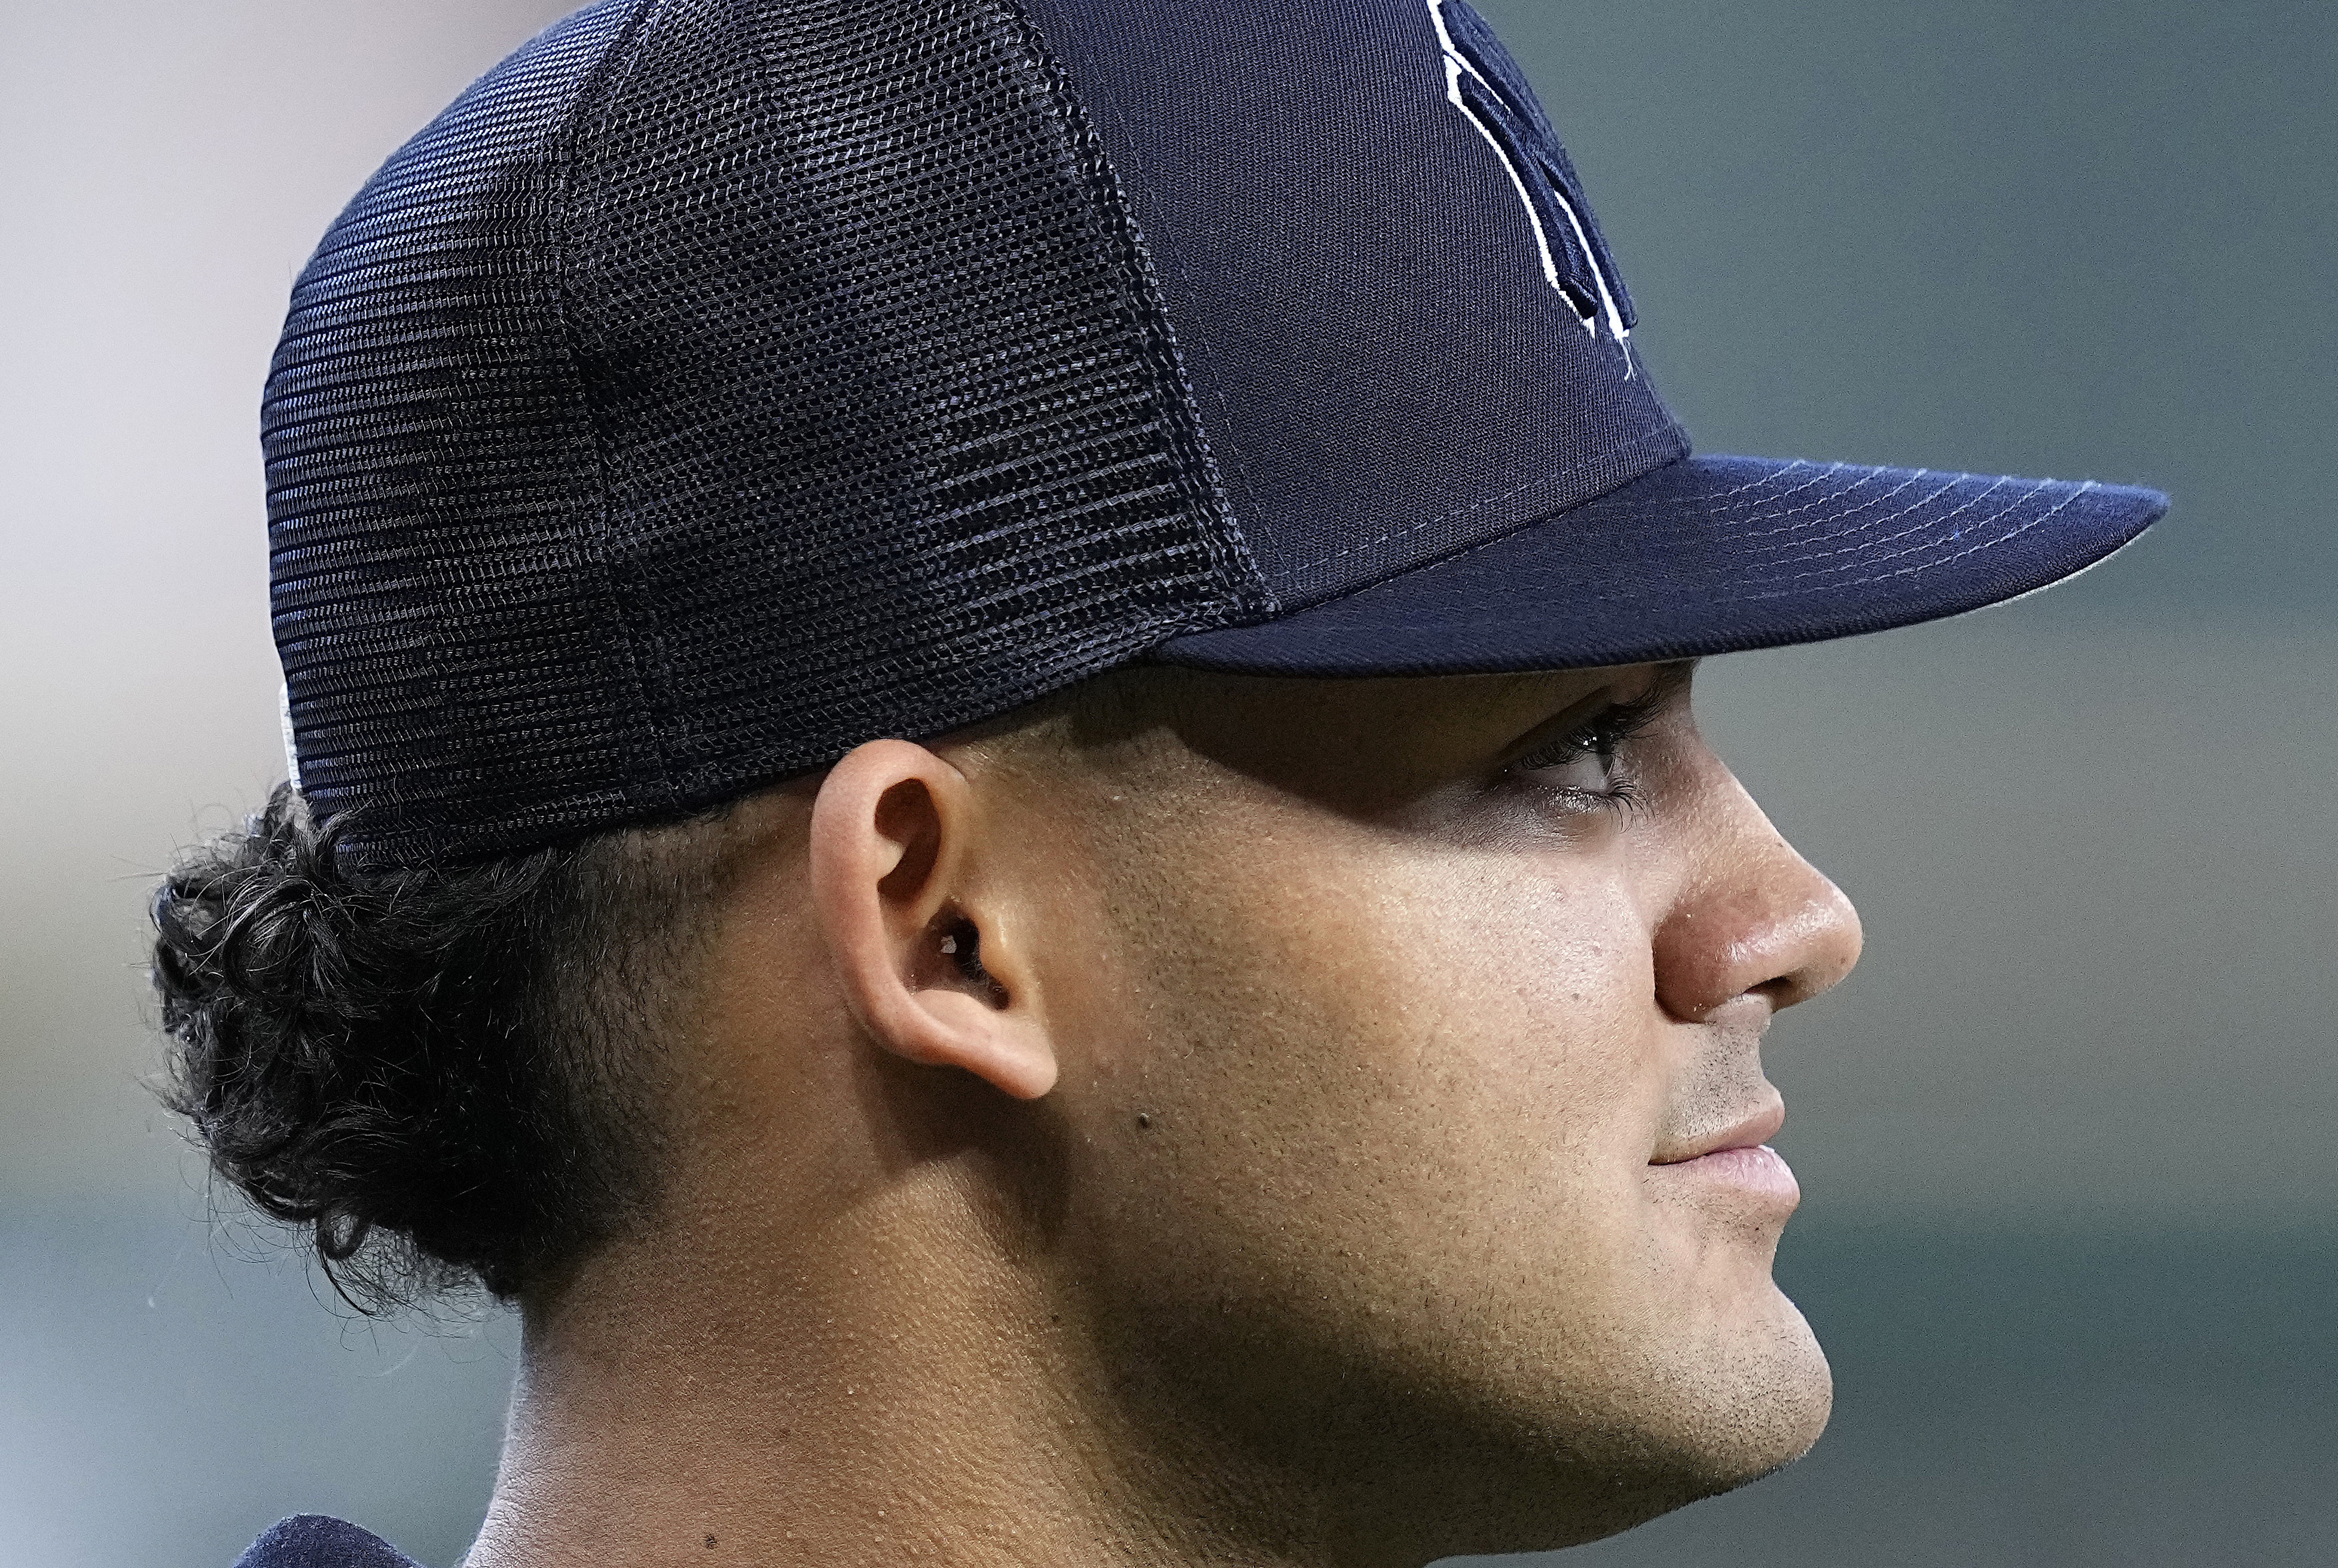 Yankees rookie Dominguez scratched vs. Brewers due to right elbow